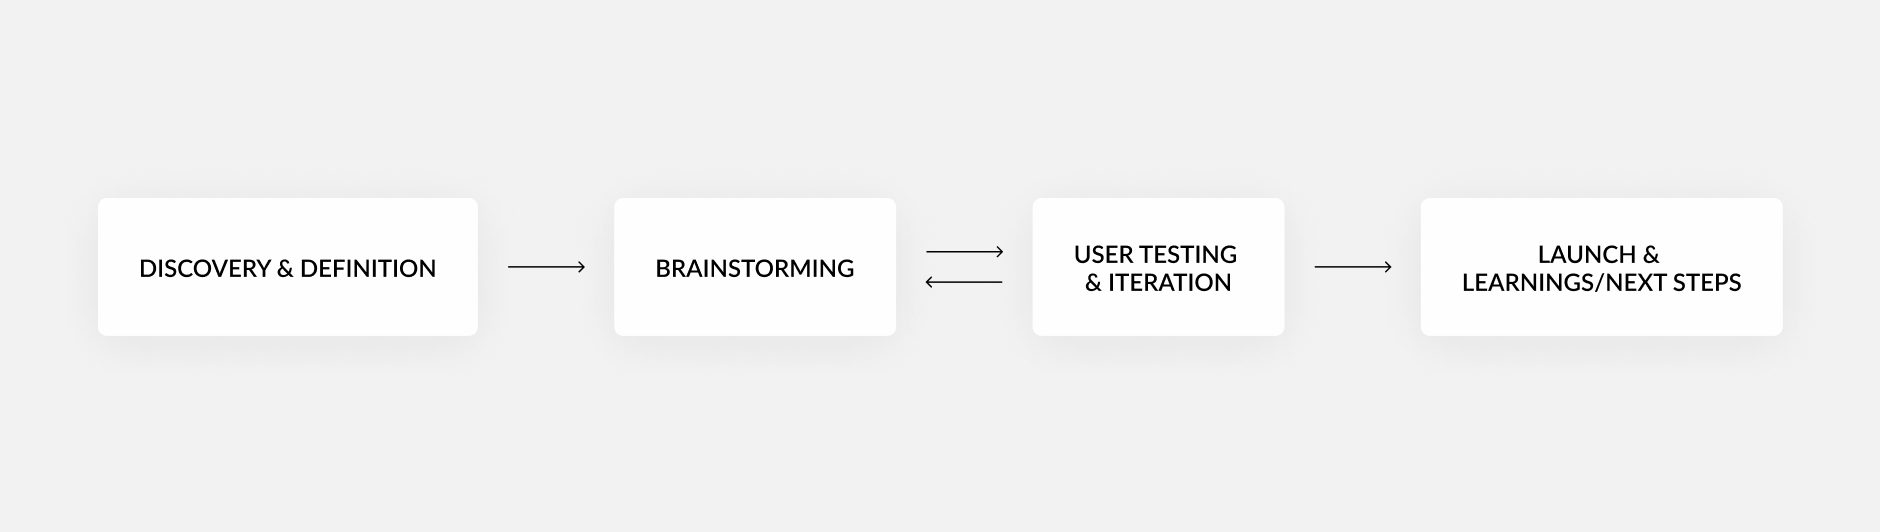 Discovery & definition leads to brainstorming with user testing & iteratation leading to the launch and learnings